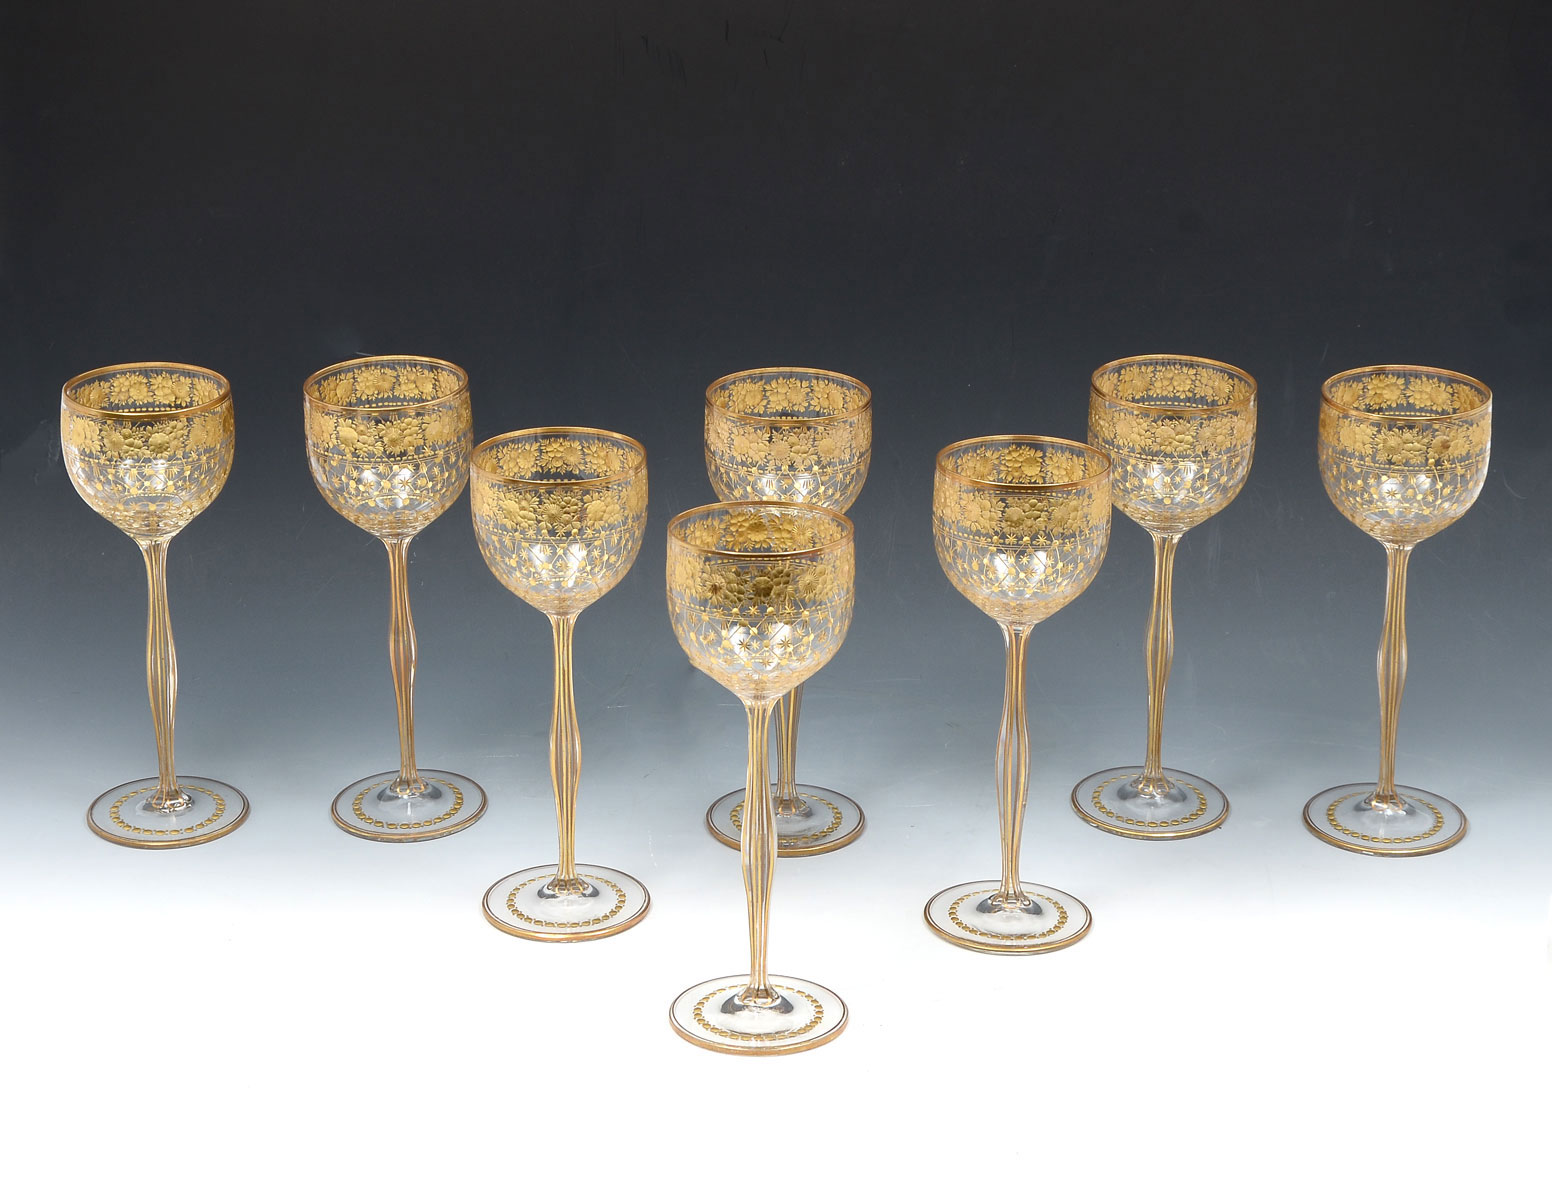 8 PC MOSER QUALITY LONG STEM WINE 36eed2